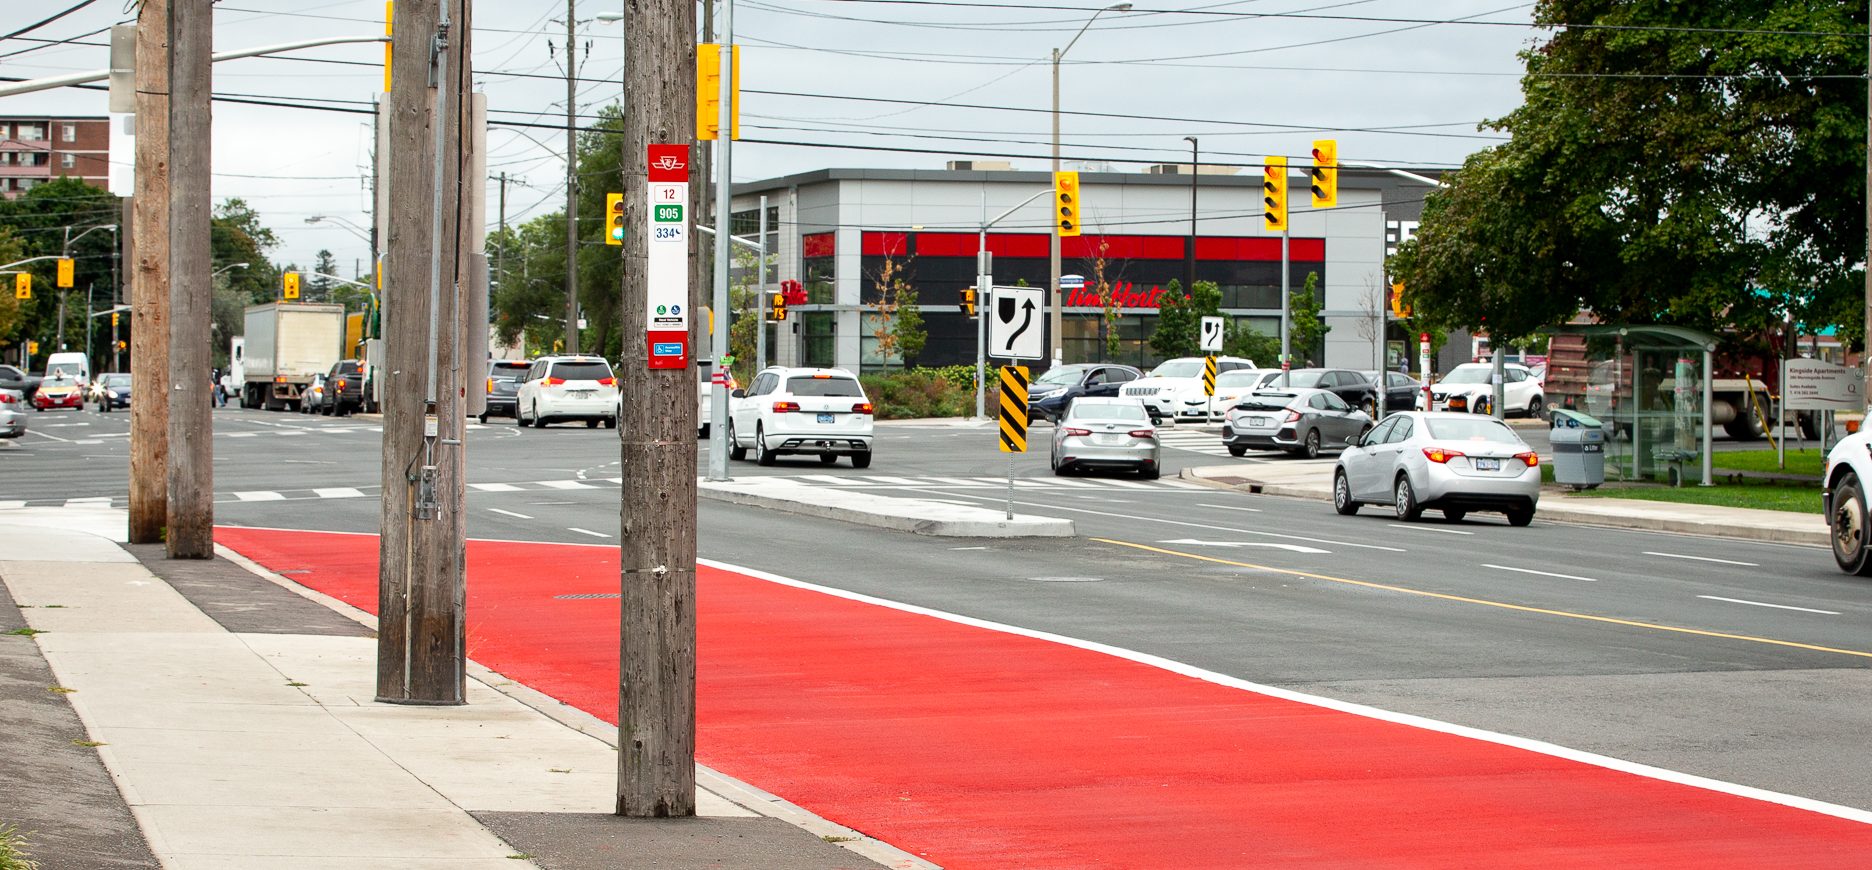 Image of Eglinton showing 4 lanes of traffic. The curb side lanes in each direction are painted red to indicate that only buses are allowed to use the lane. 